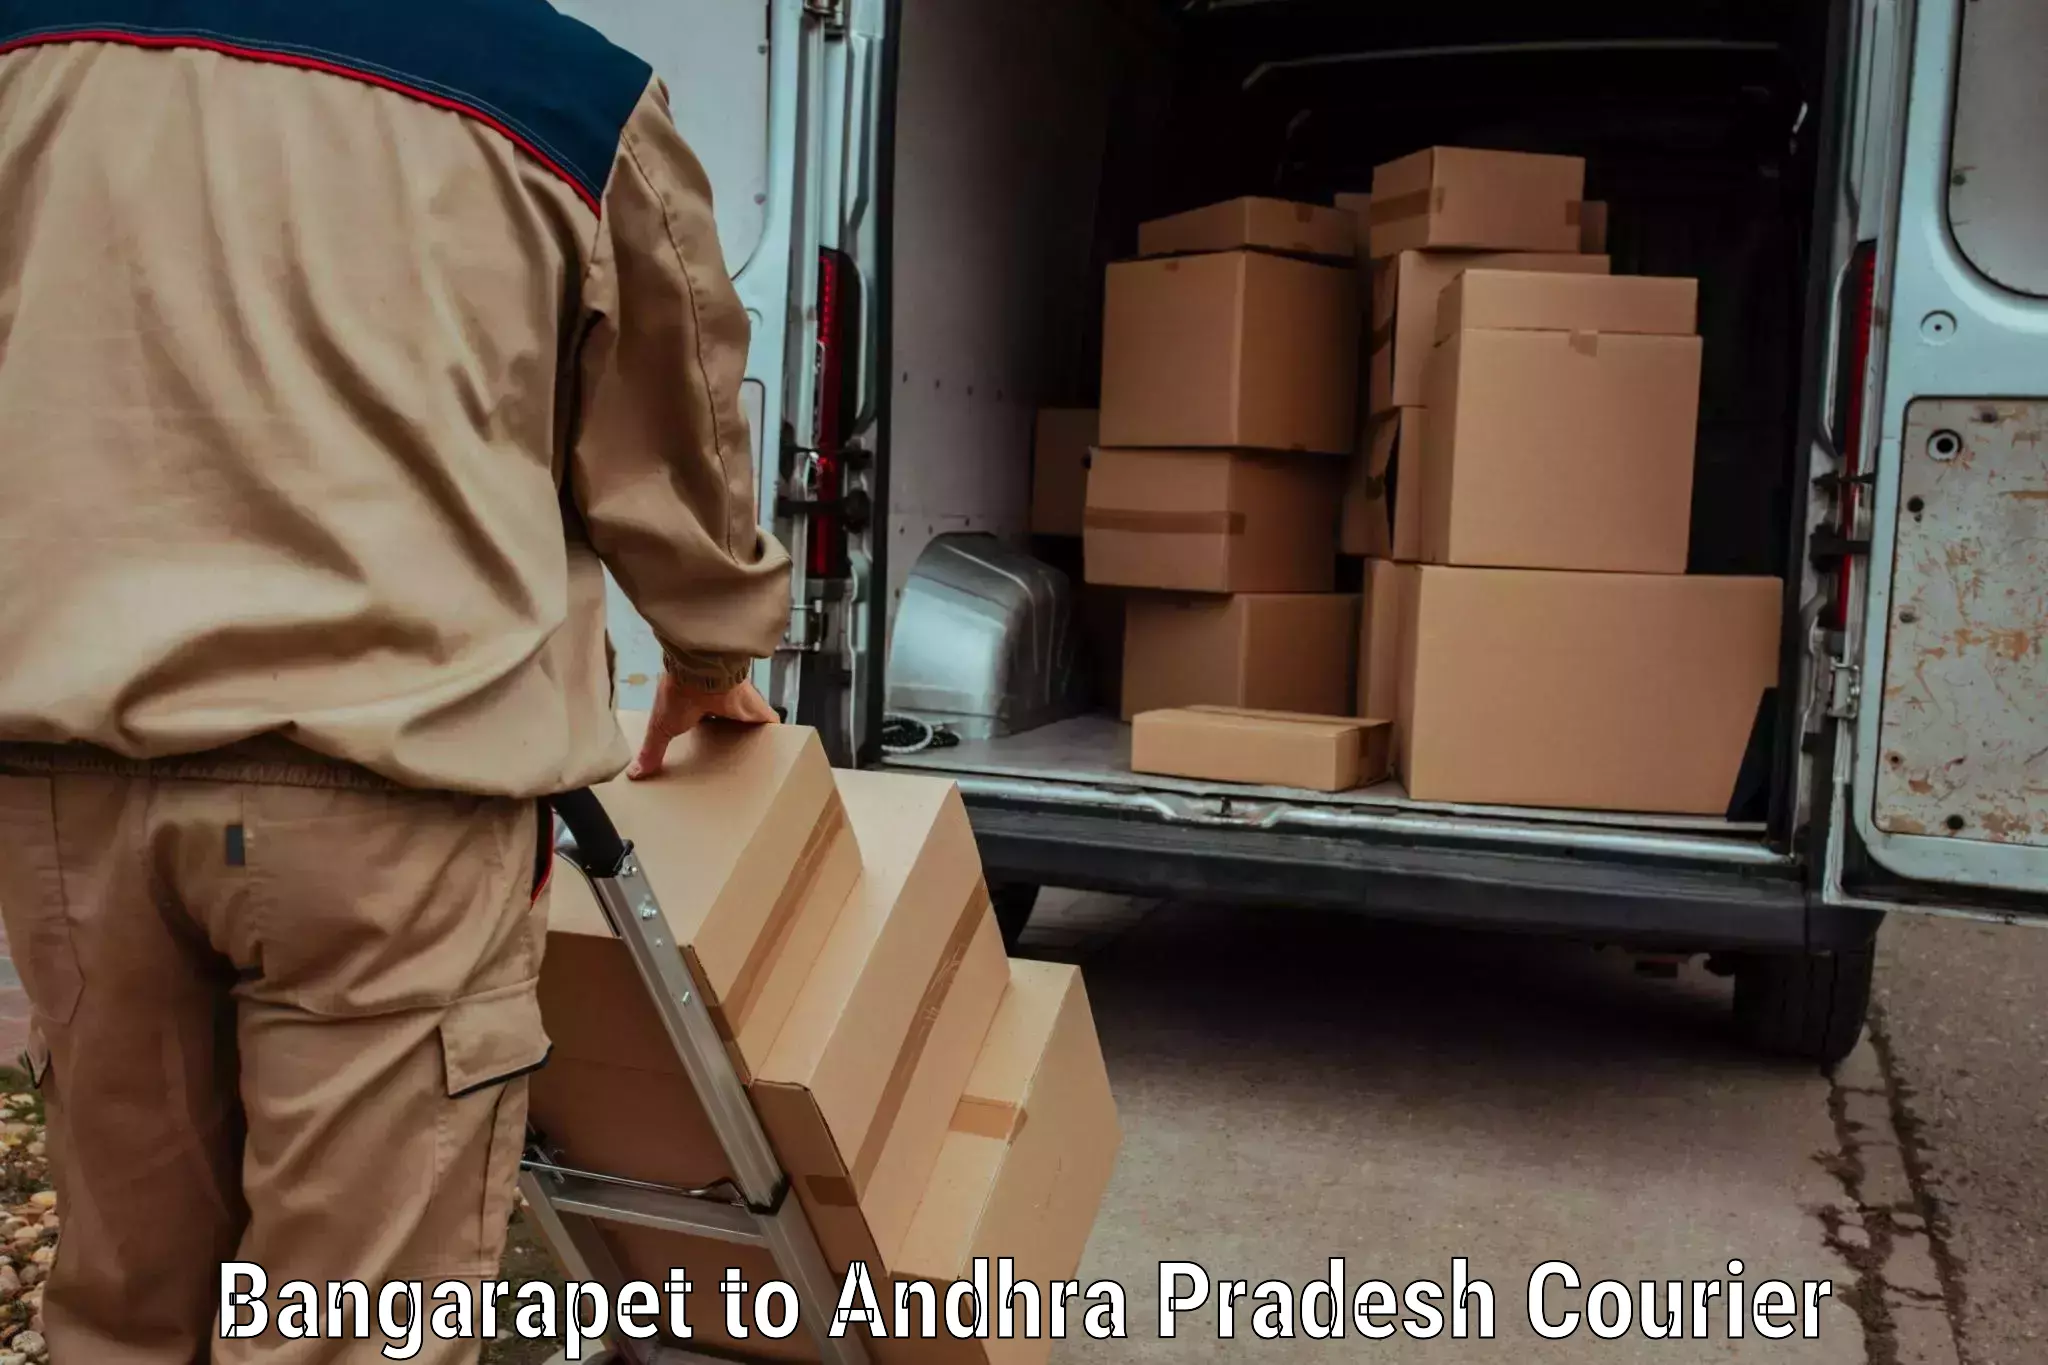 Express delivery network Bangarapet to Chintapalli